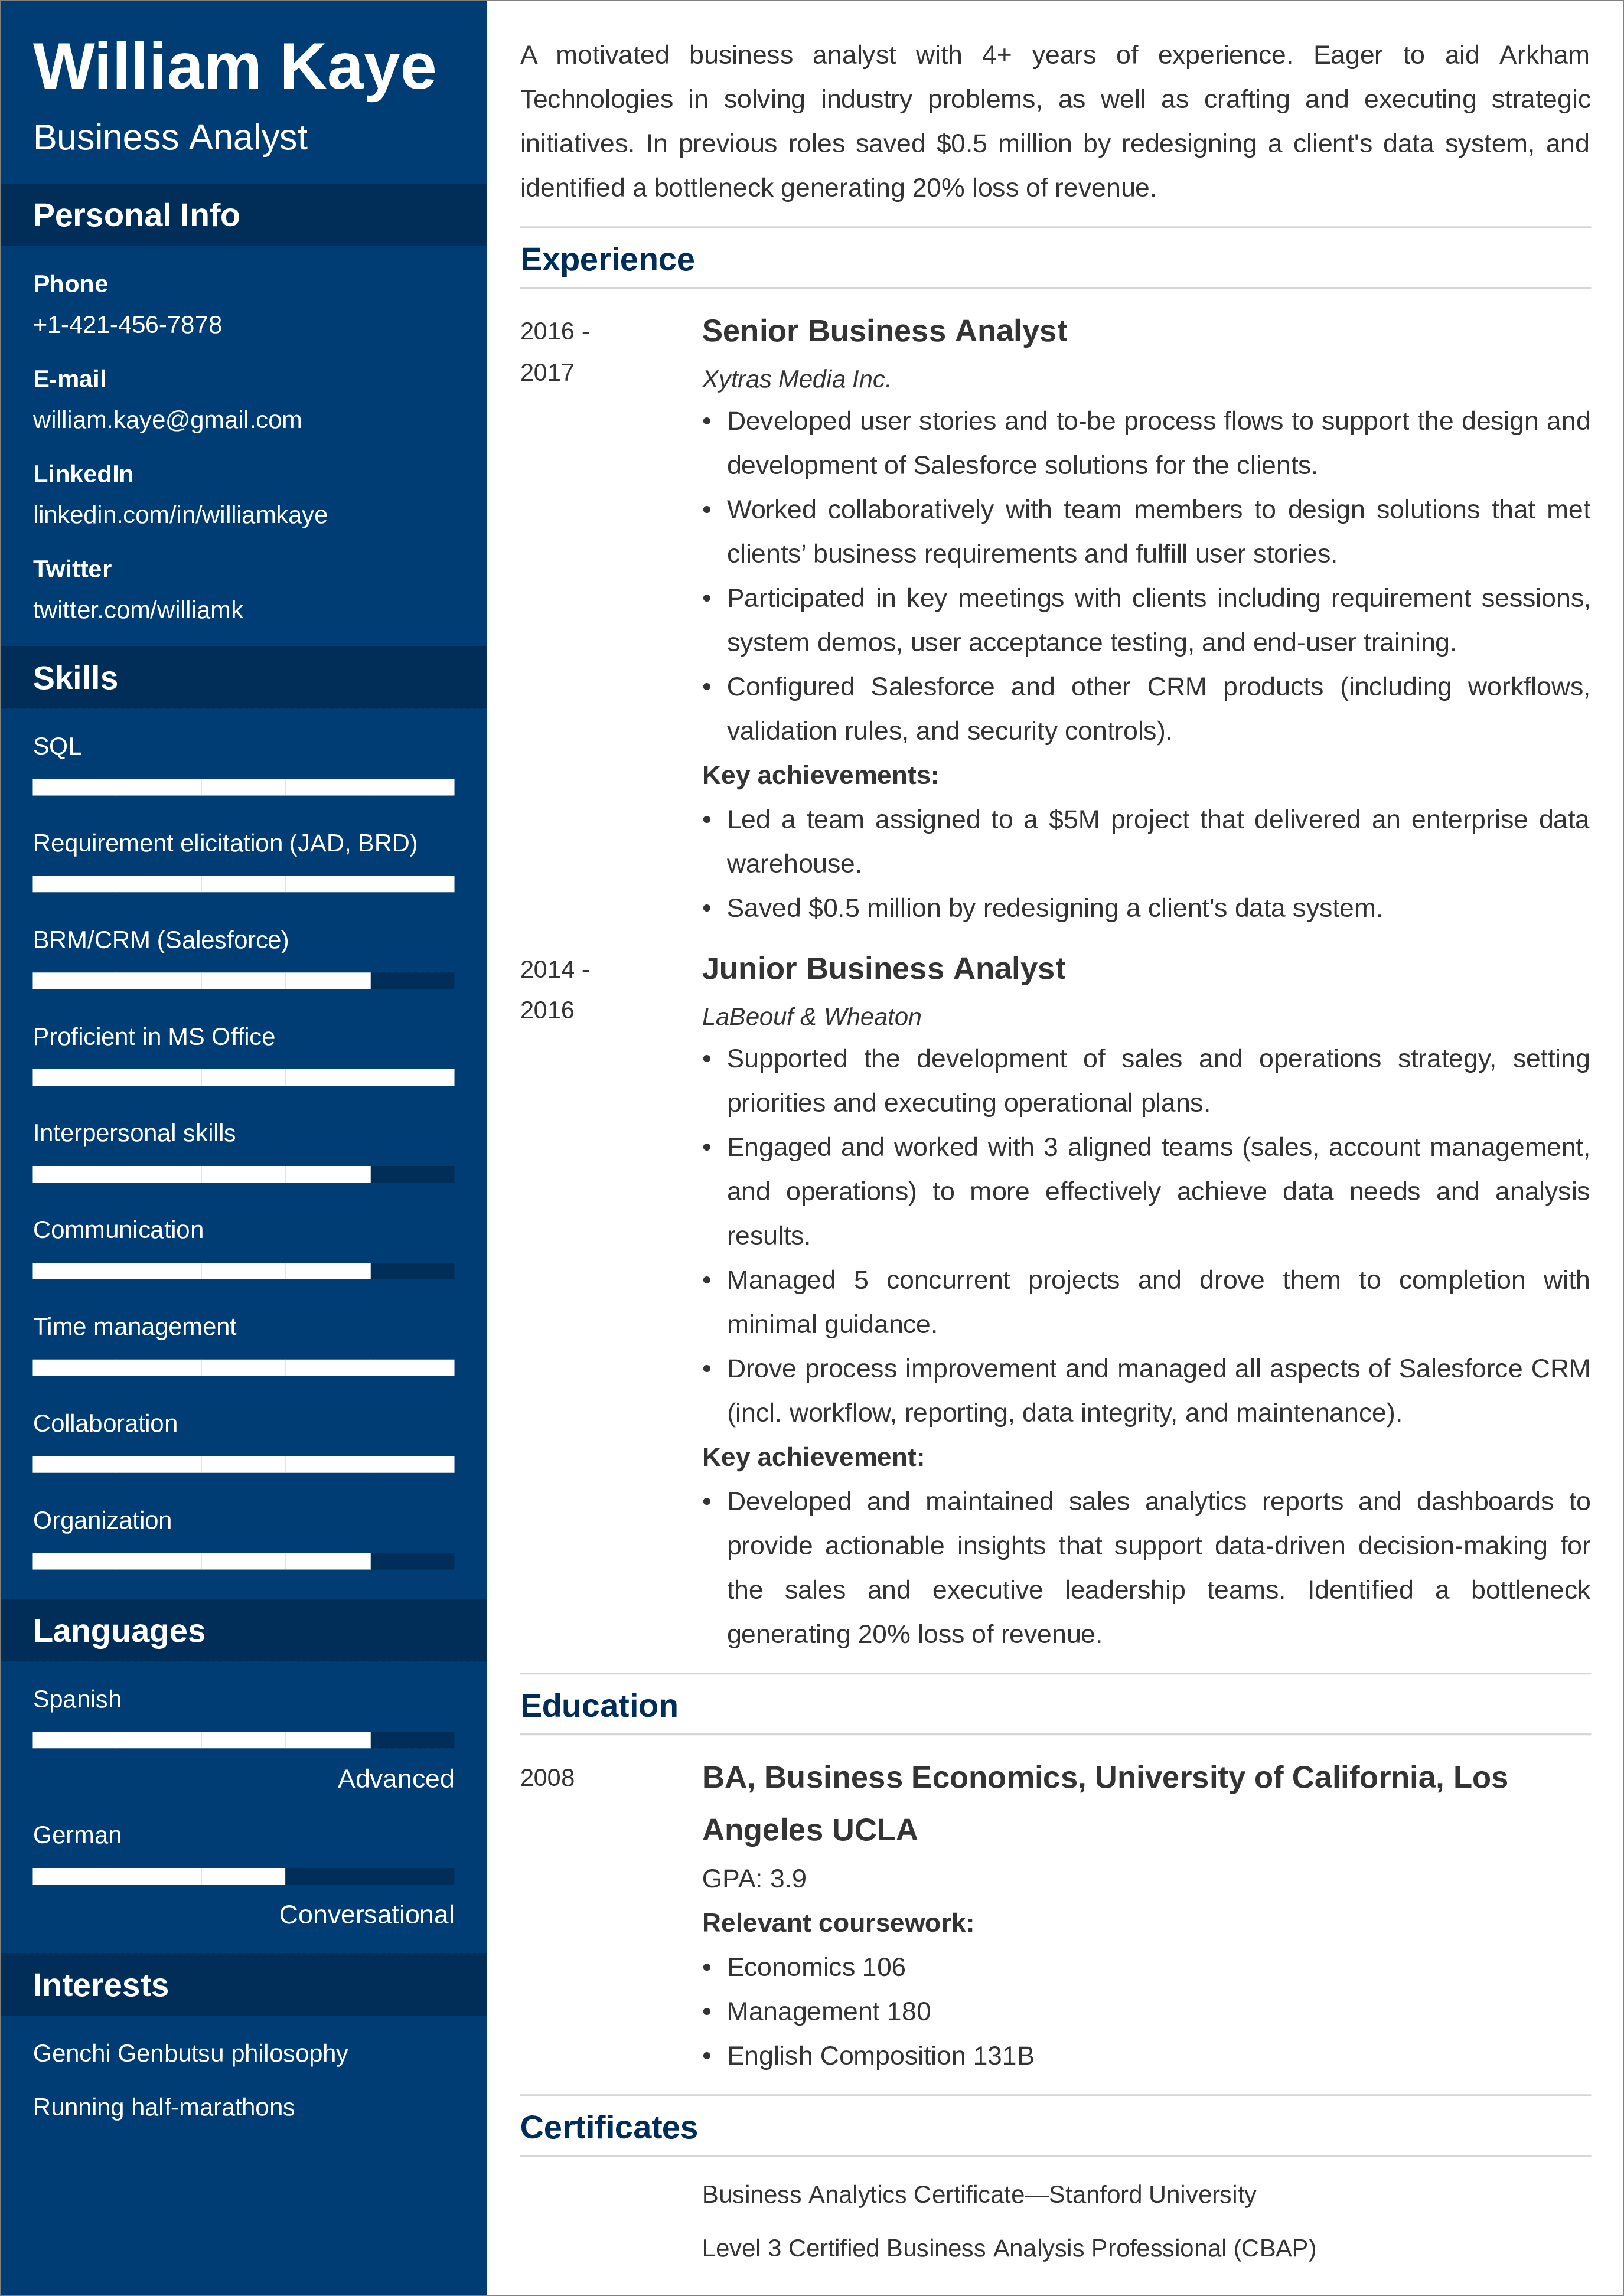 Business Analyst CV Sample 25+ Examples and Writing Tips